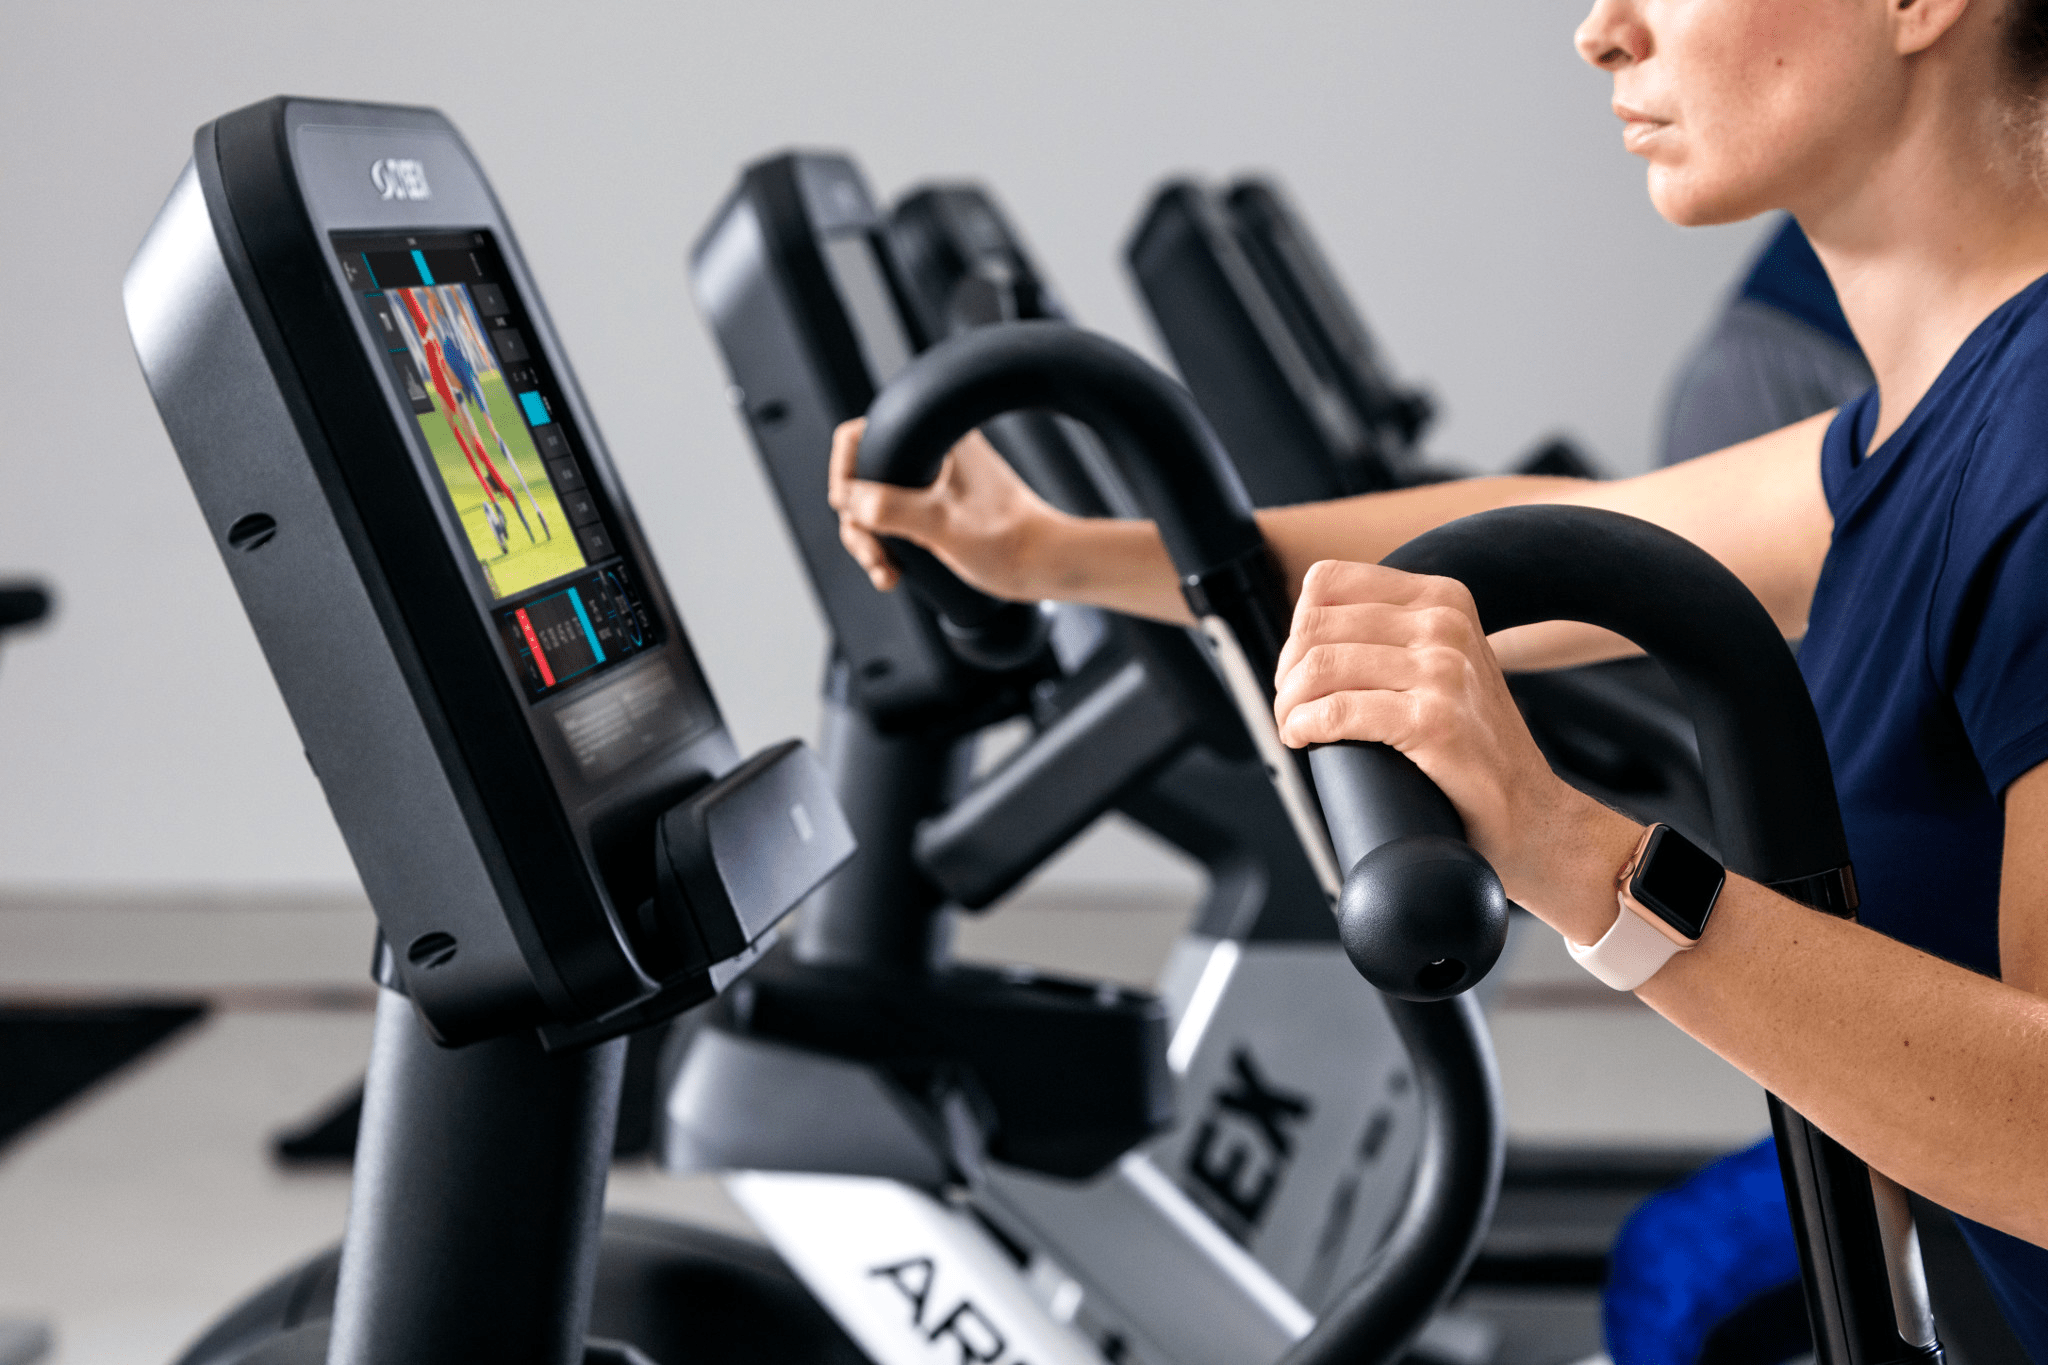 Cybex R Series Total Body Arc Trainer with 50L LED Display